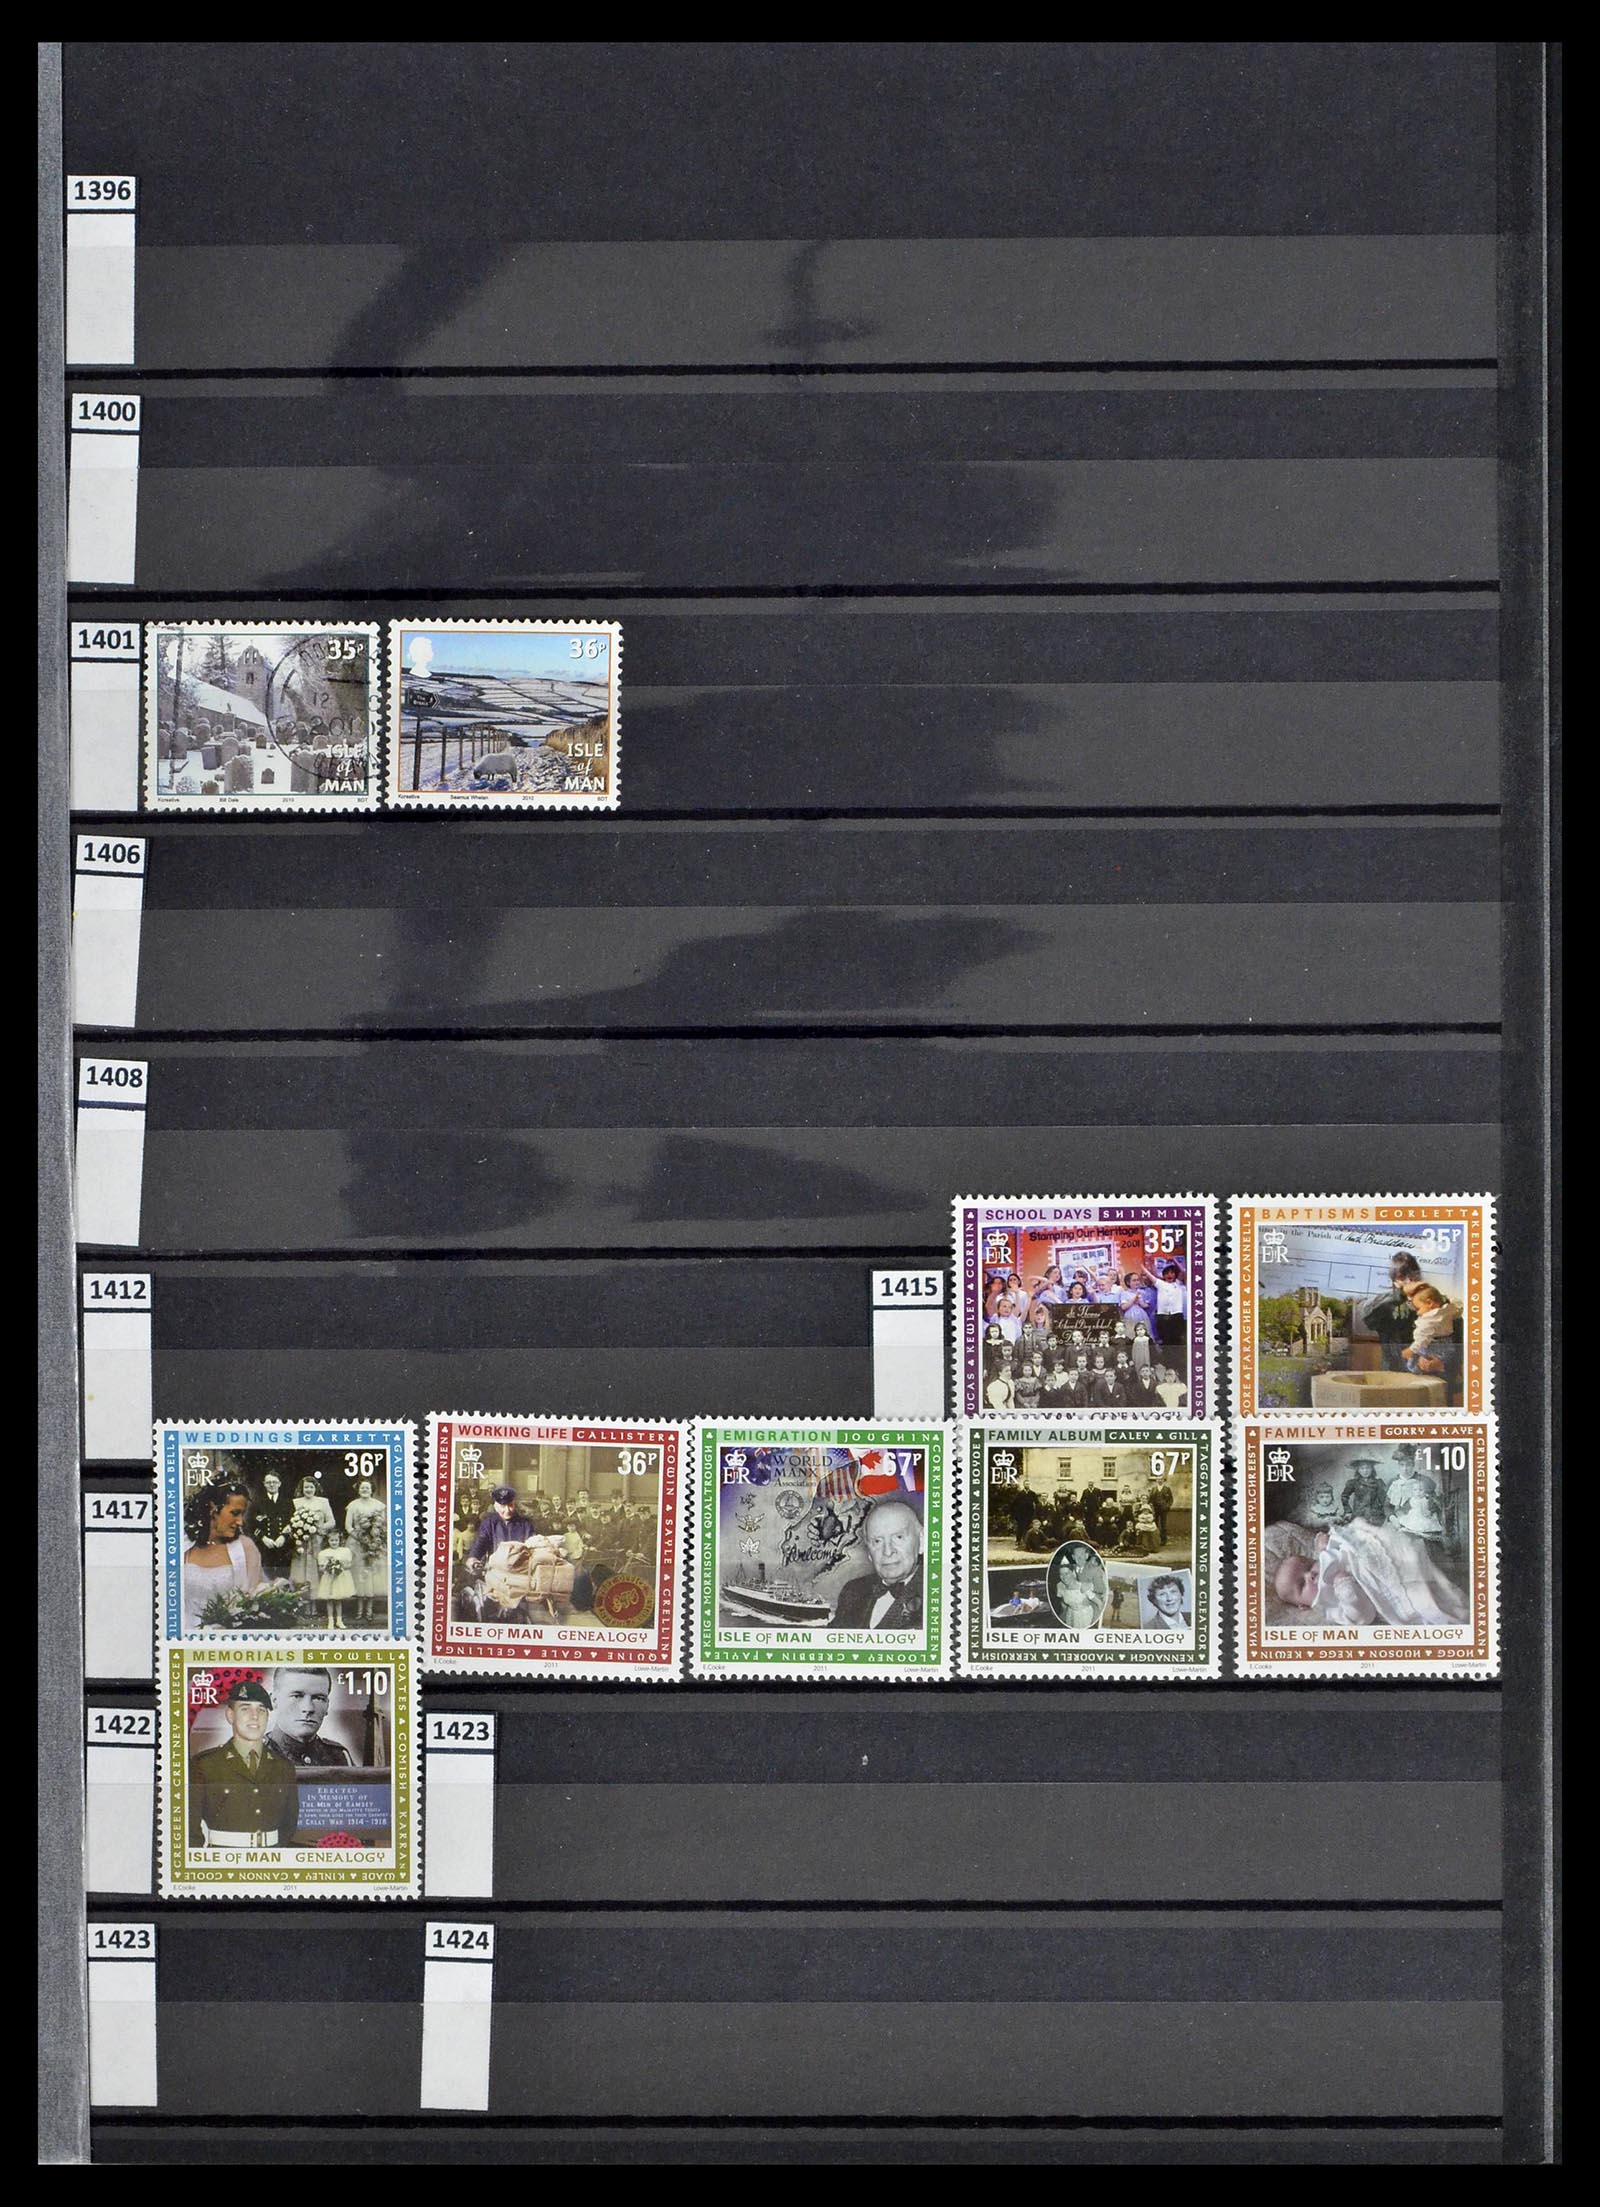 39197 0148 - Stamp collection 39197 Channel Islands 1941-2015.